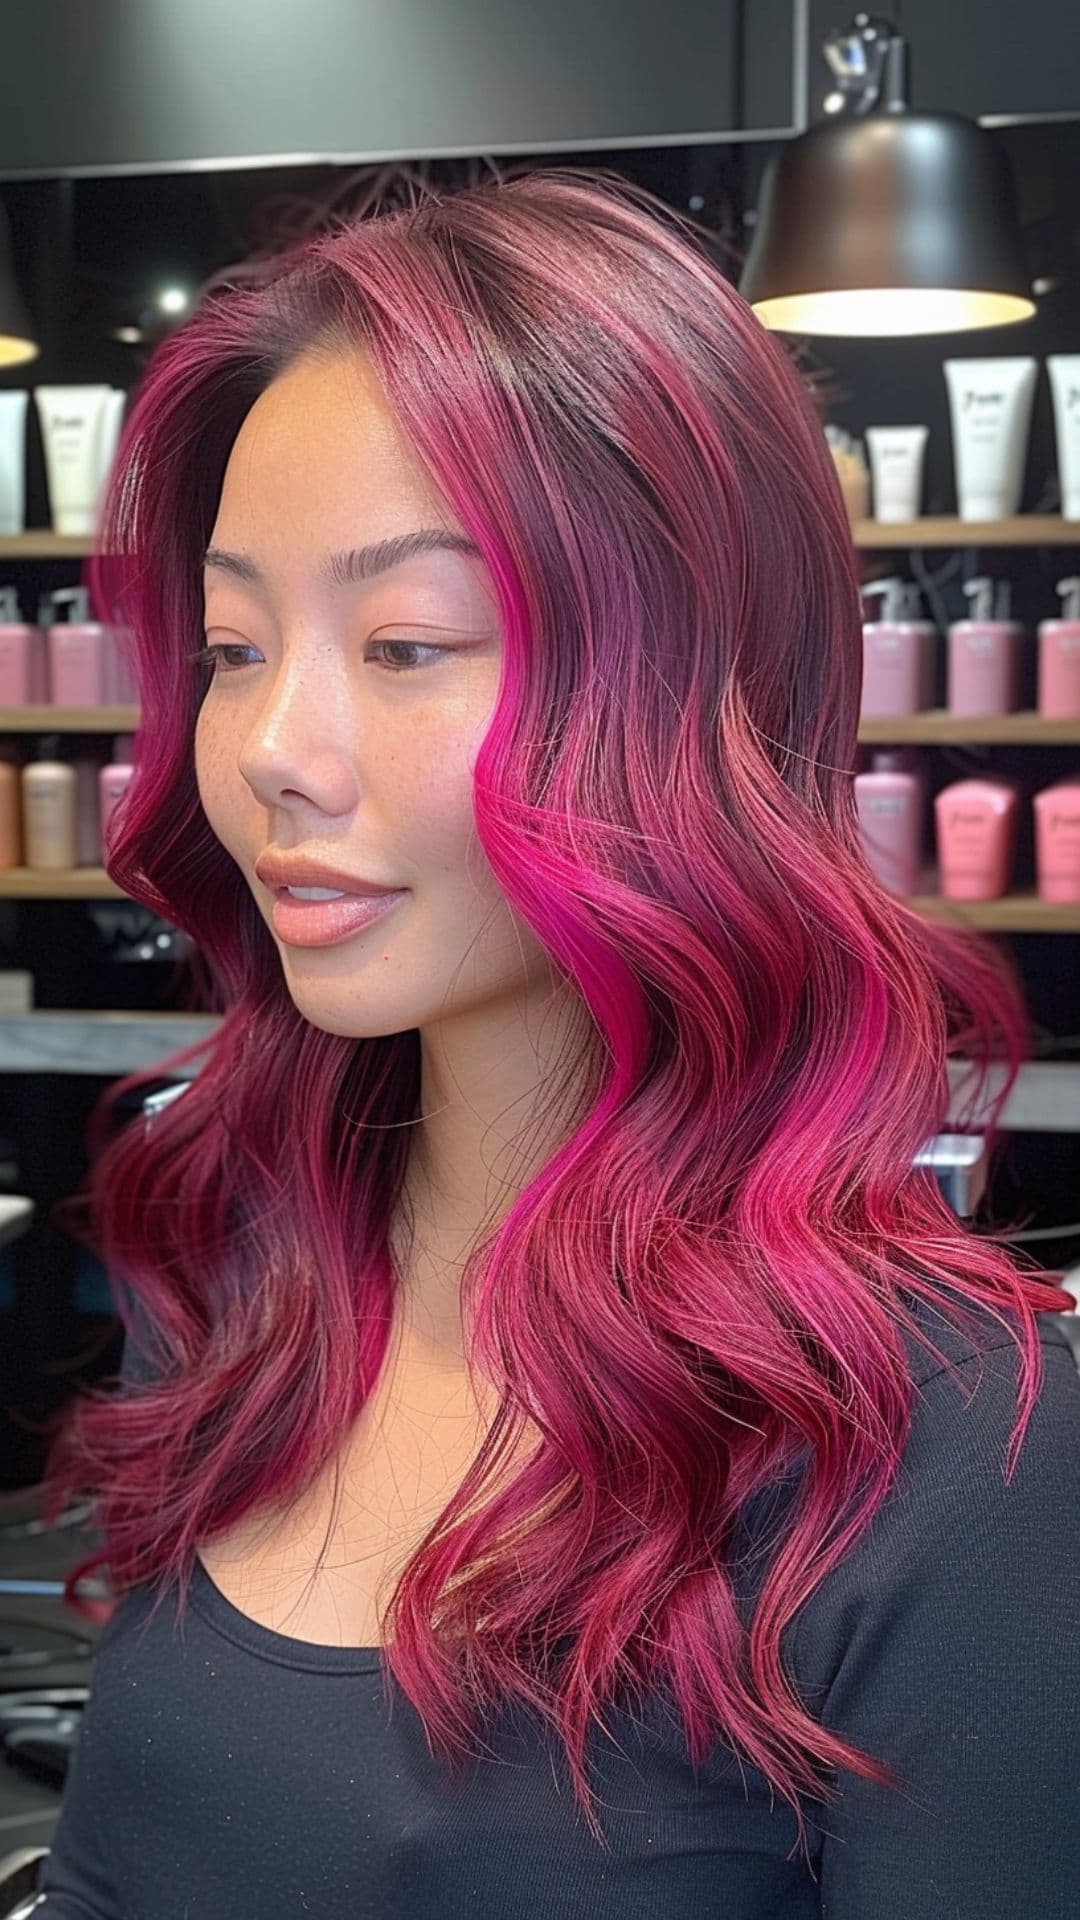 A woman modelling a hot pink highlights.